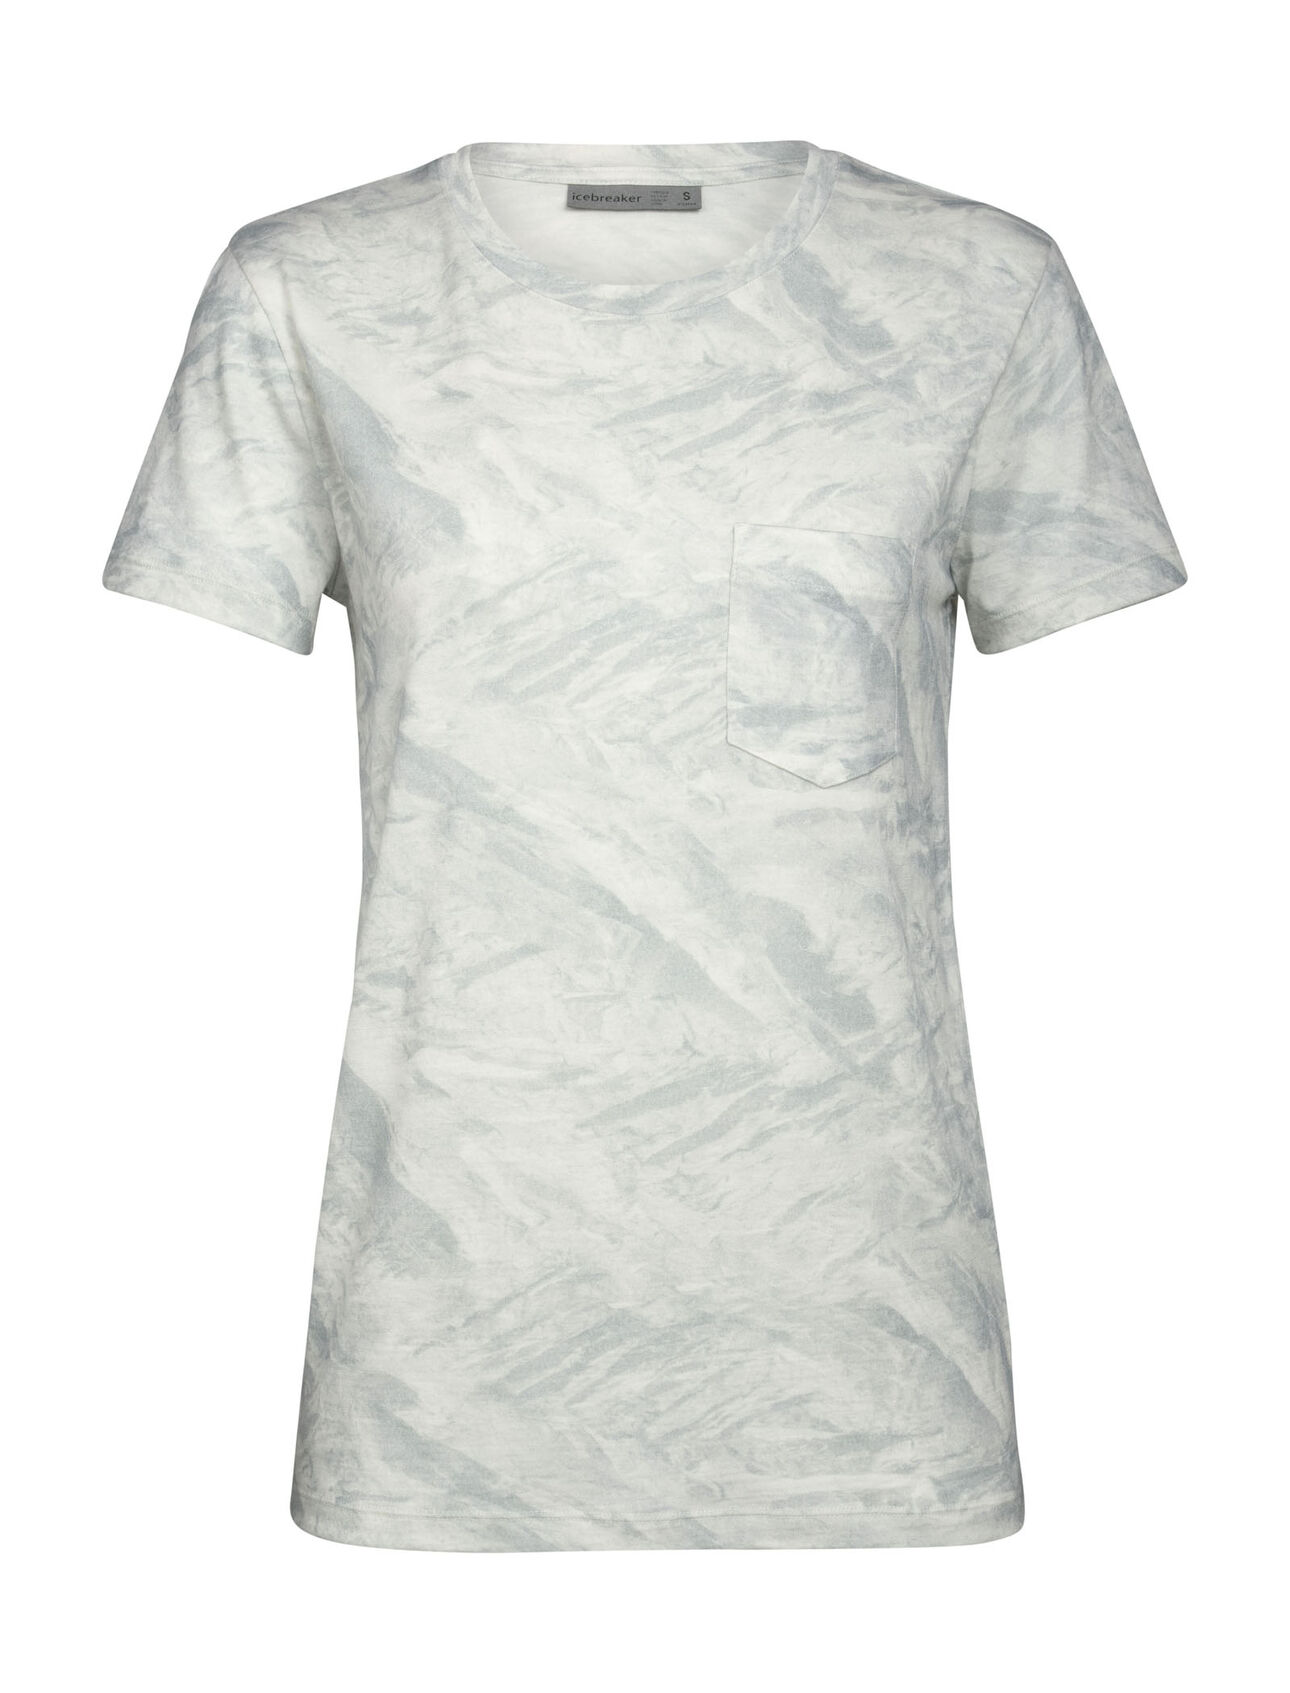 Womens Merino 200 Short Sleeve Pocket Crewe Thermal T-Shirt IB Glacier Justin Brice Guariglia, a New York City based artist and photographer known for his work addressing climate change, has partnered with icebreaker. The icebreaker x Justin Brice Guariglia collection features Guariglia's remarkable pictures of Greenland's melting glaciers.Inspired by people with purpose, icebreaker provides a platform to raise greater awareness and visibility of the crisis our natural world is facing.  Find out more 